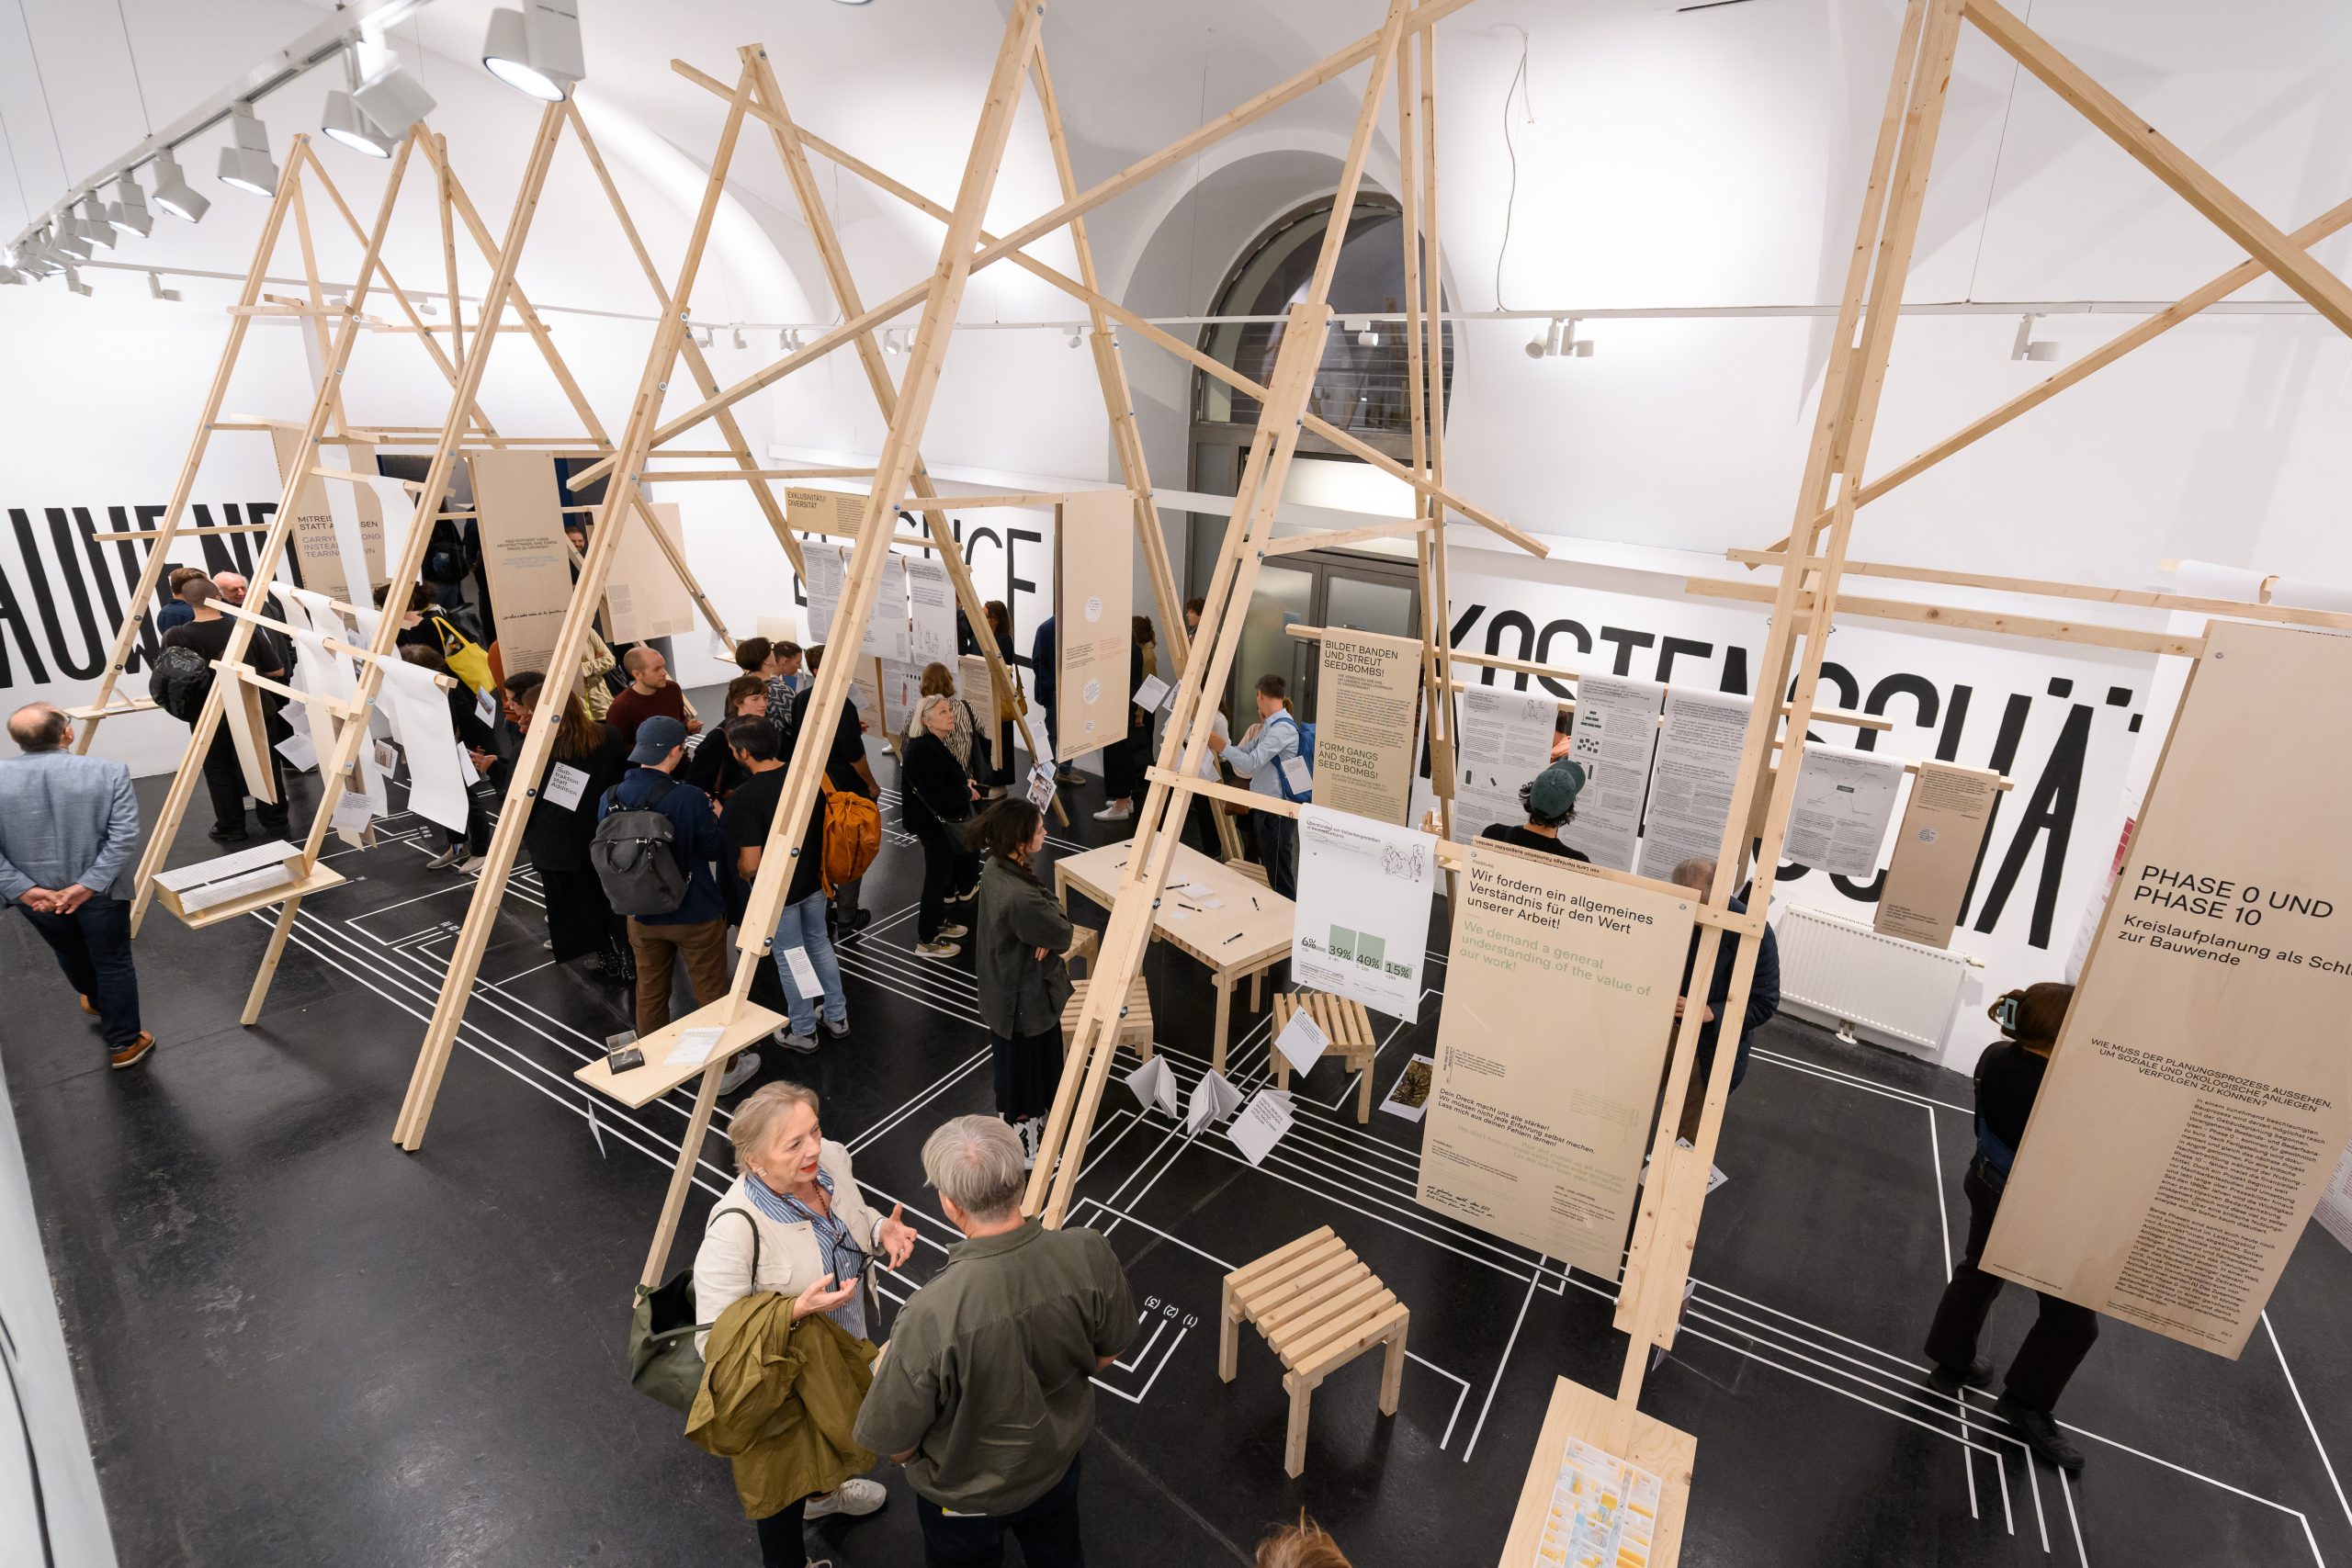 Exhibition space with many people and wooden scaffolding